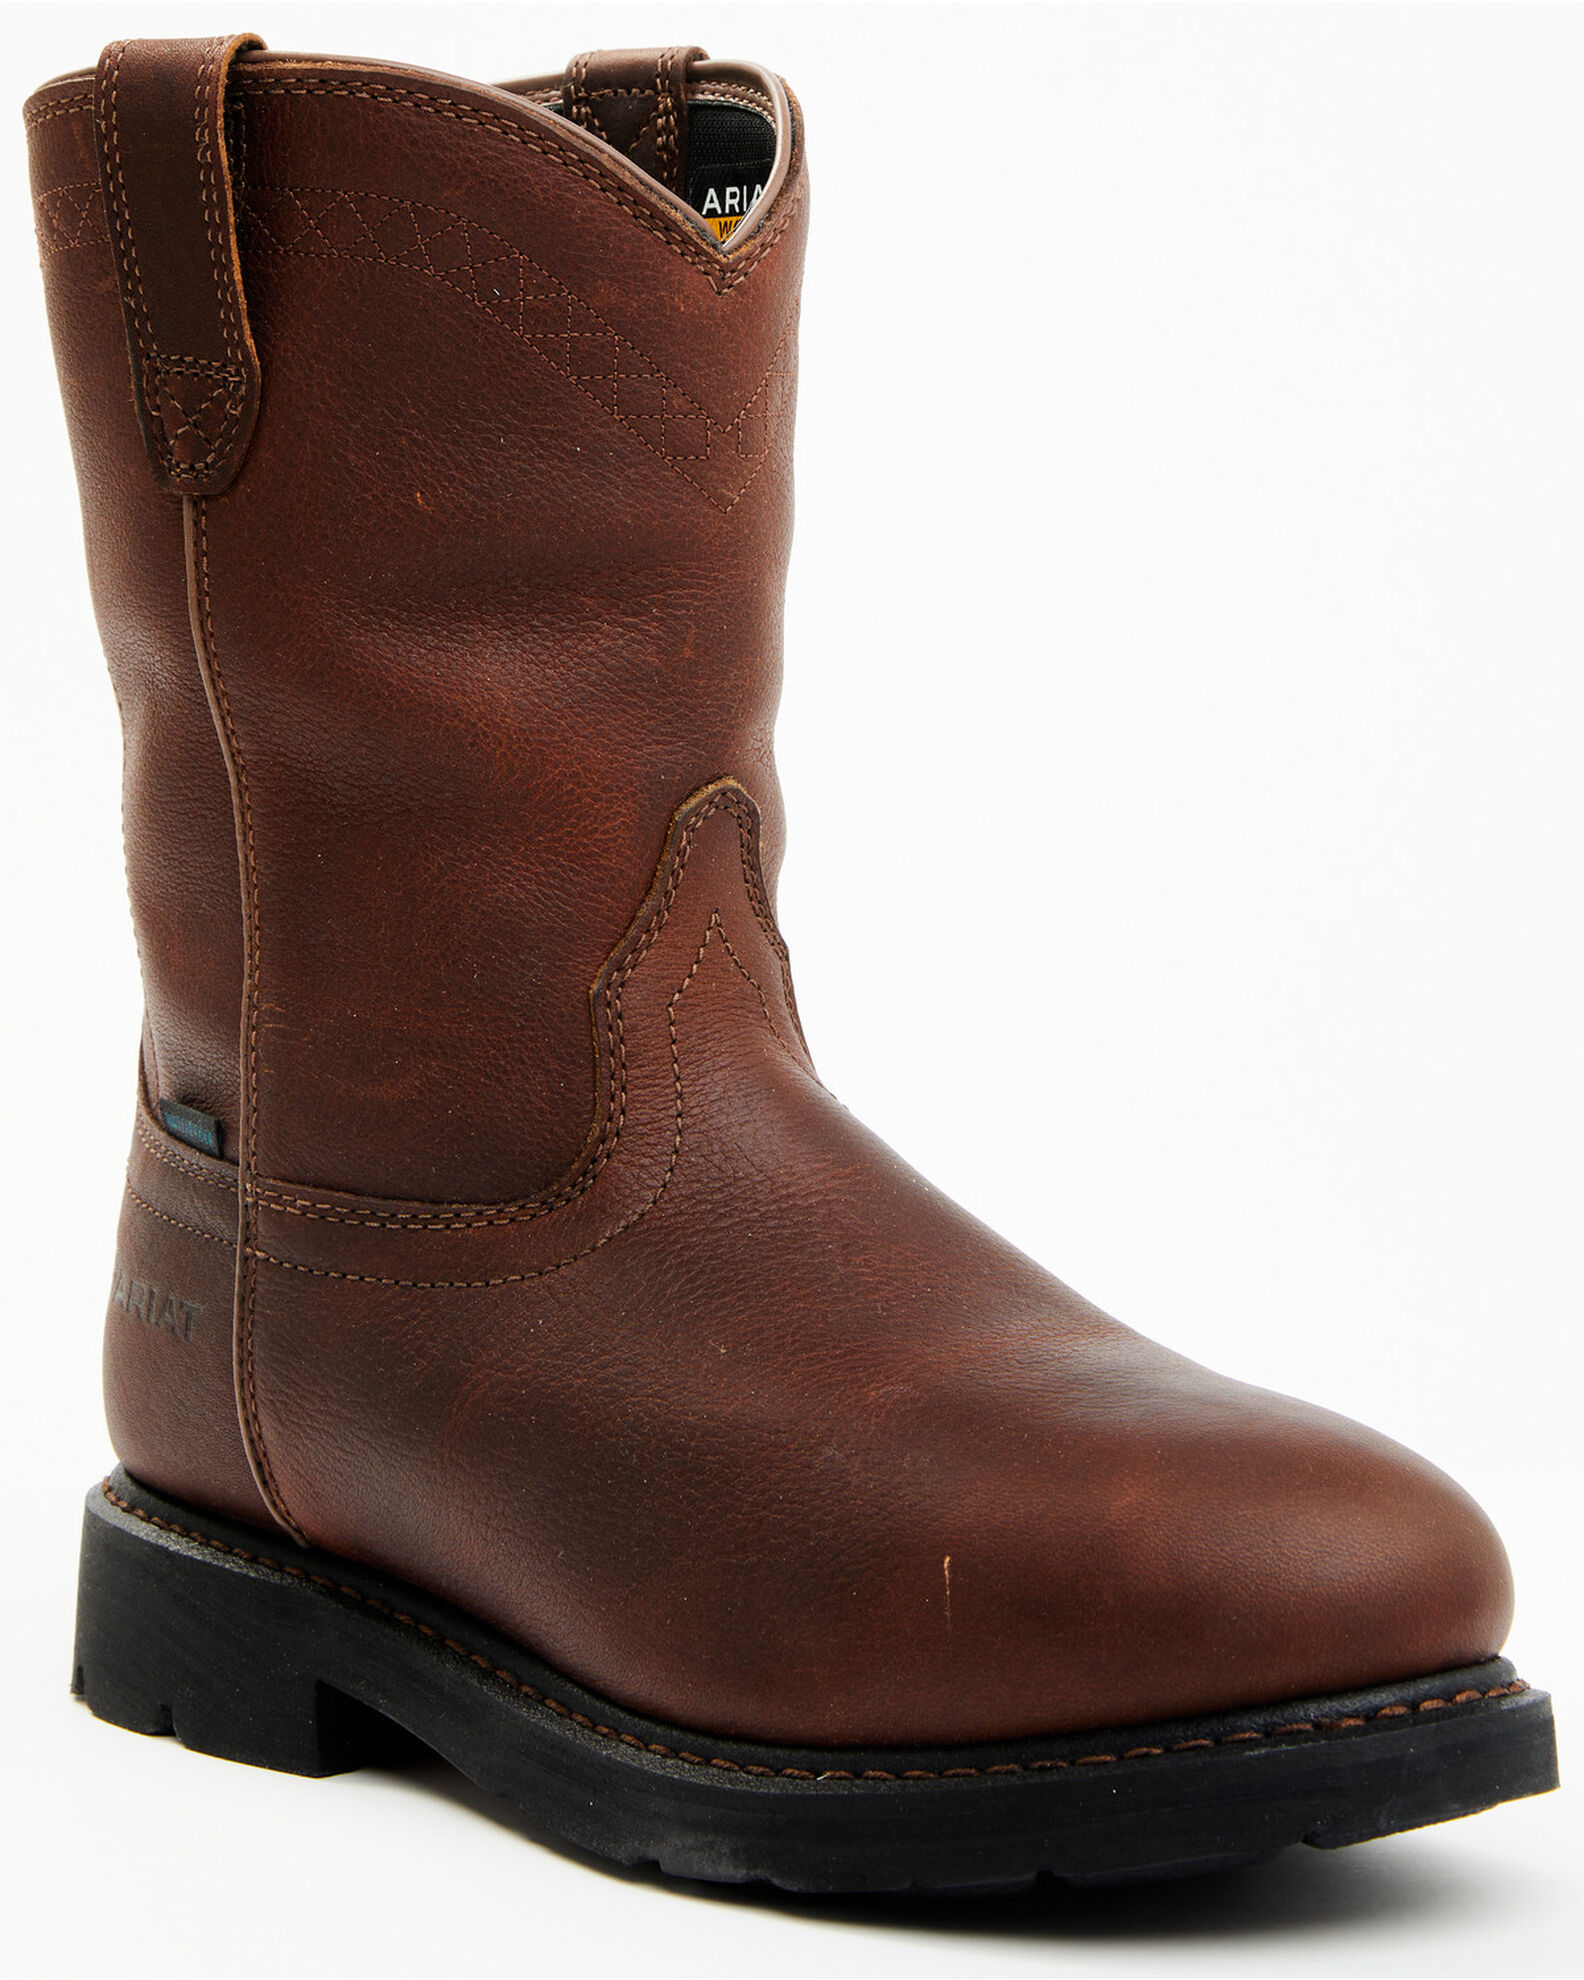 Product Name: Ariat Men's Sierra H2O Waterproof Work Boots - Soft Toe